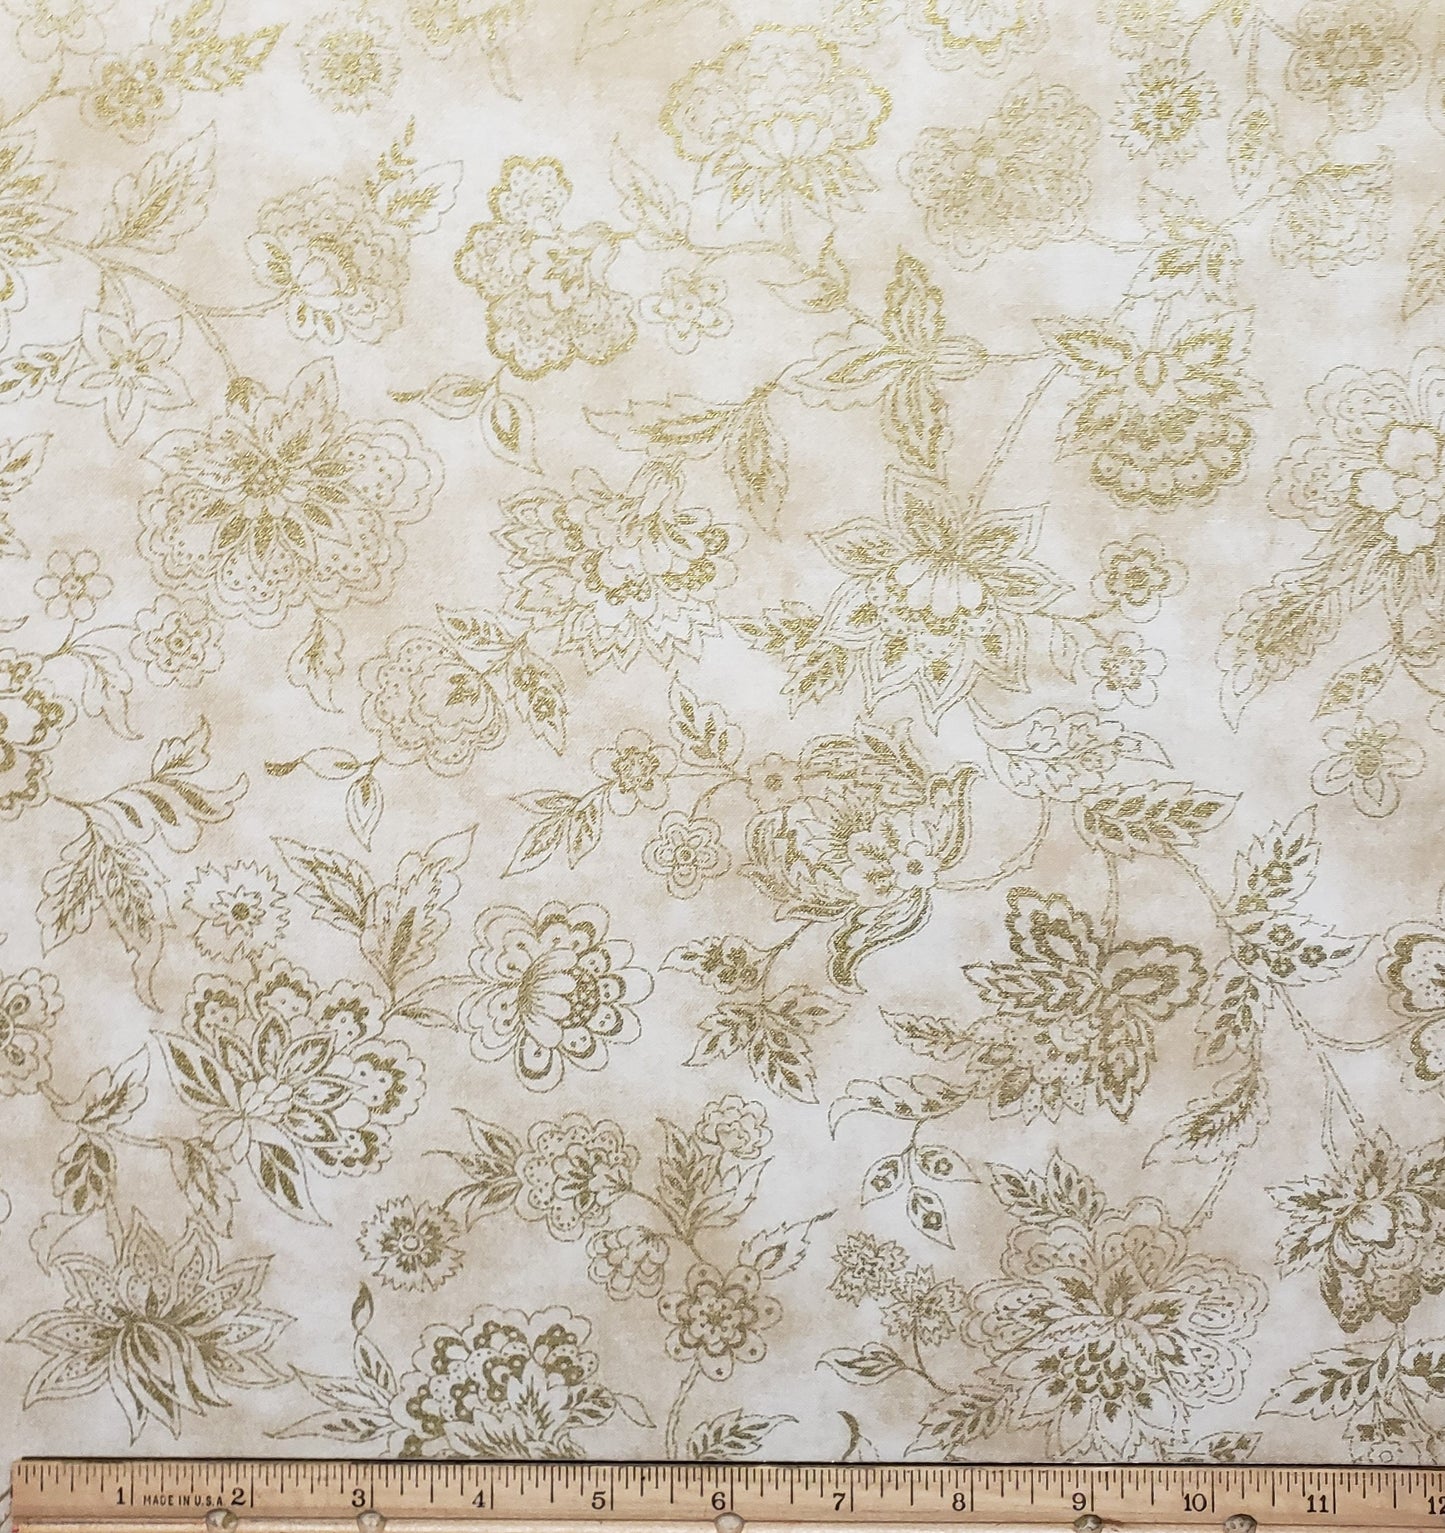 EOB - Mottled Tan Fabric with Larger Metallic Gold Flower Pattern - Selvage to Selvage Print